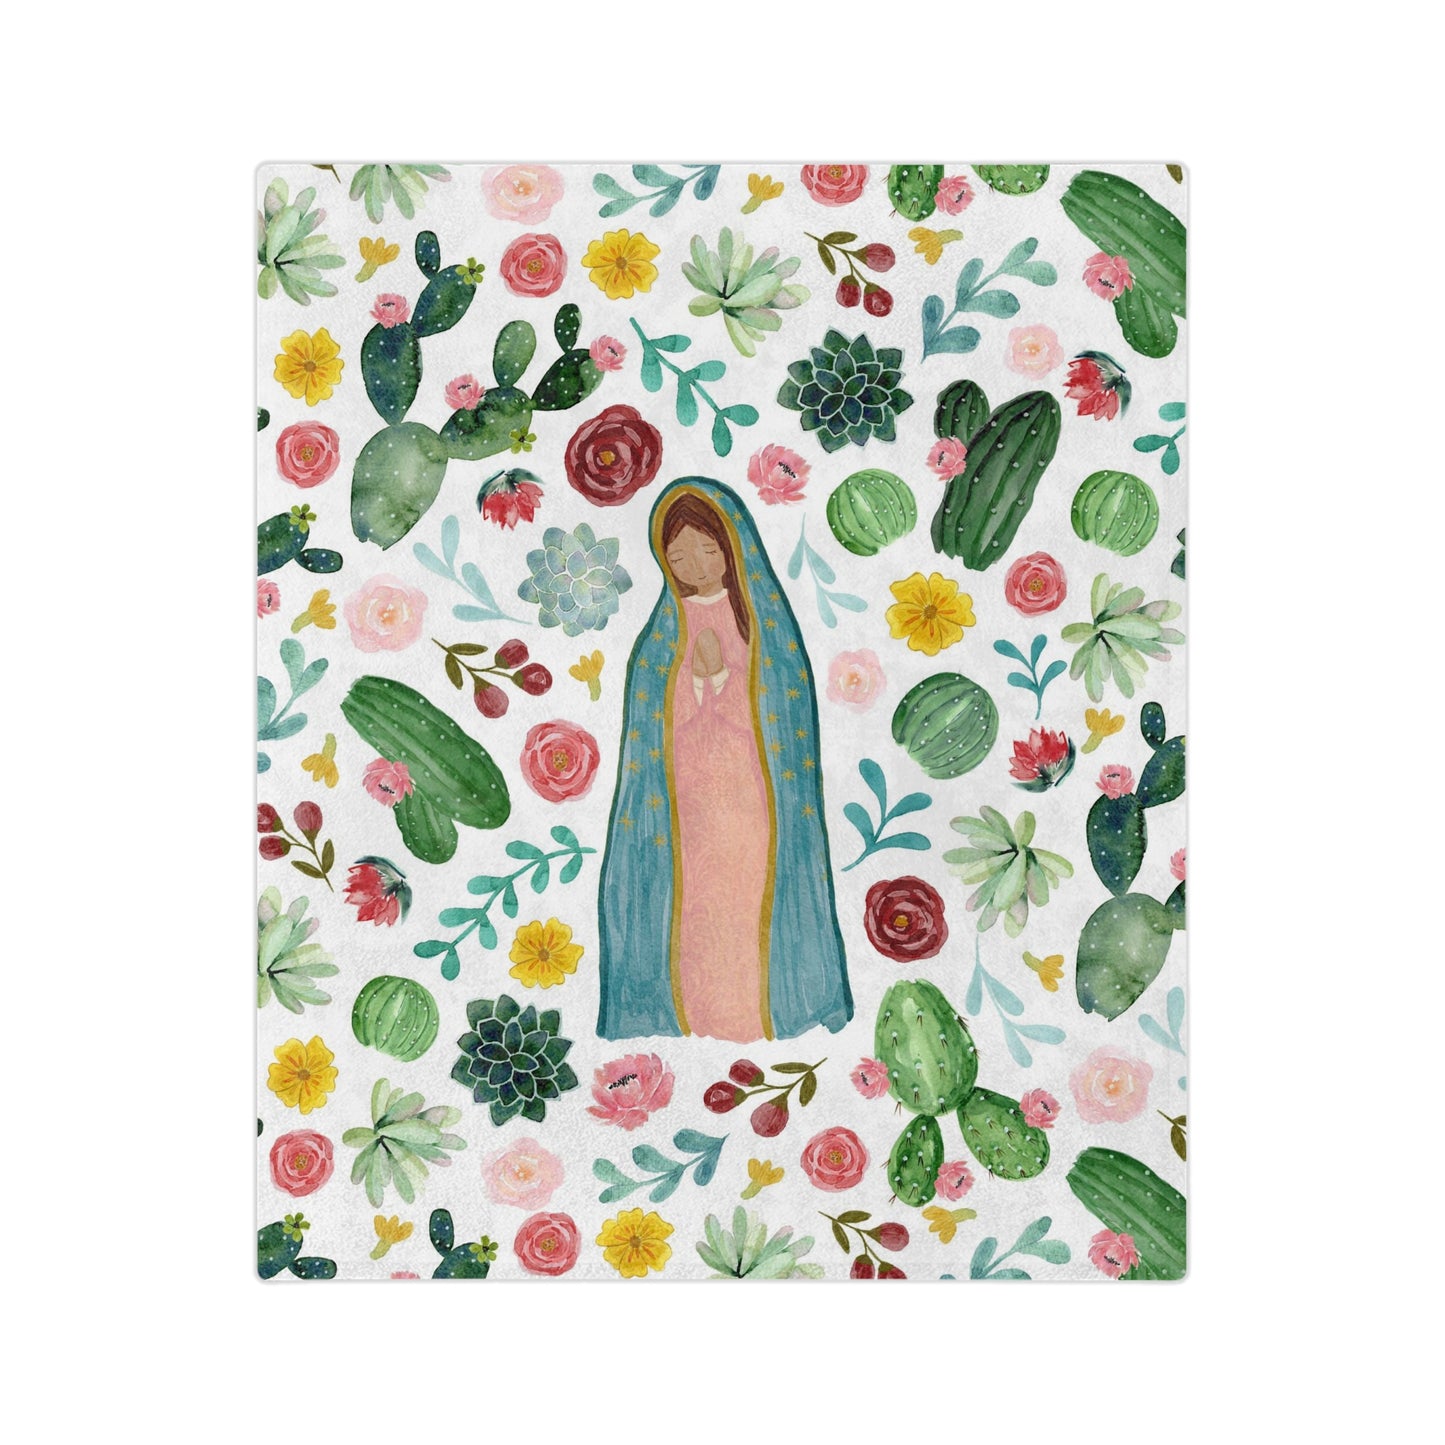 Watercolor lady Guadalupe Blanket. Cactus, flowers and virgencita throw blanket for Mexican family or friends. Christmas gift ideas.